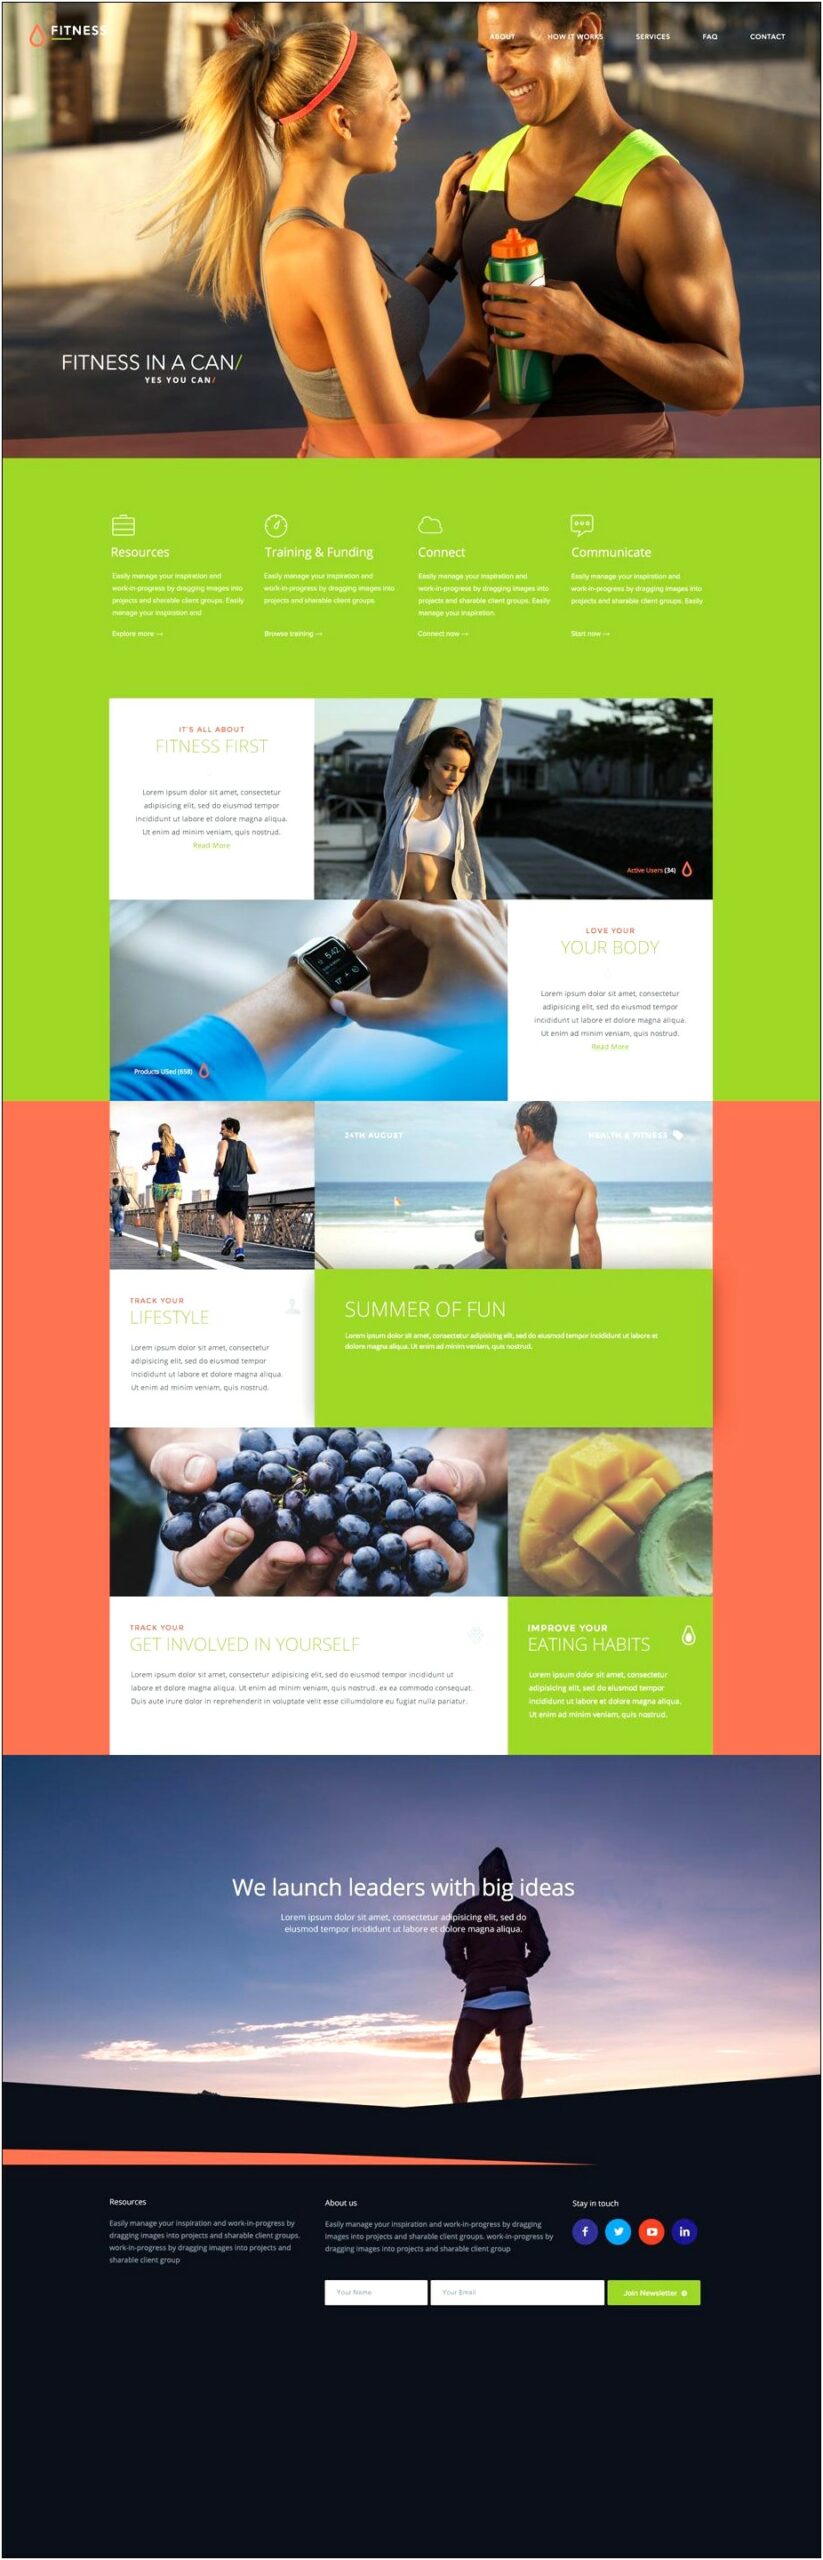 Free Psd Web Template Download 2015